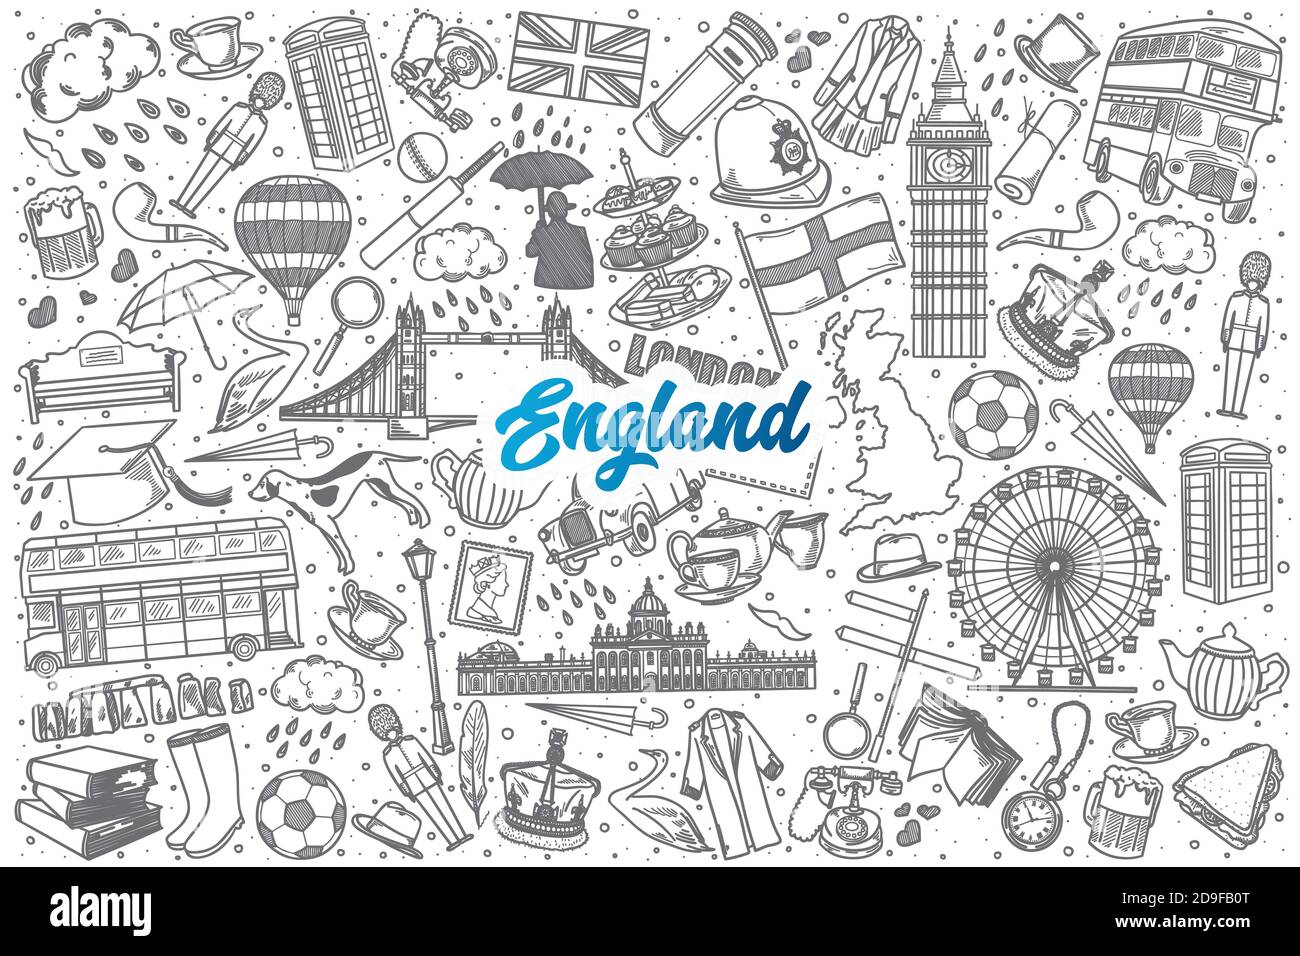 Hand drawn England doodle set with lettering Stock Vector